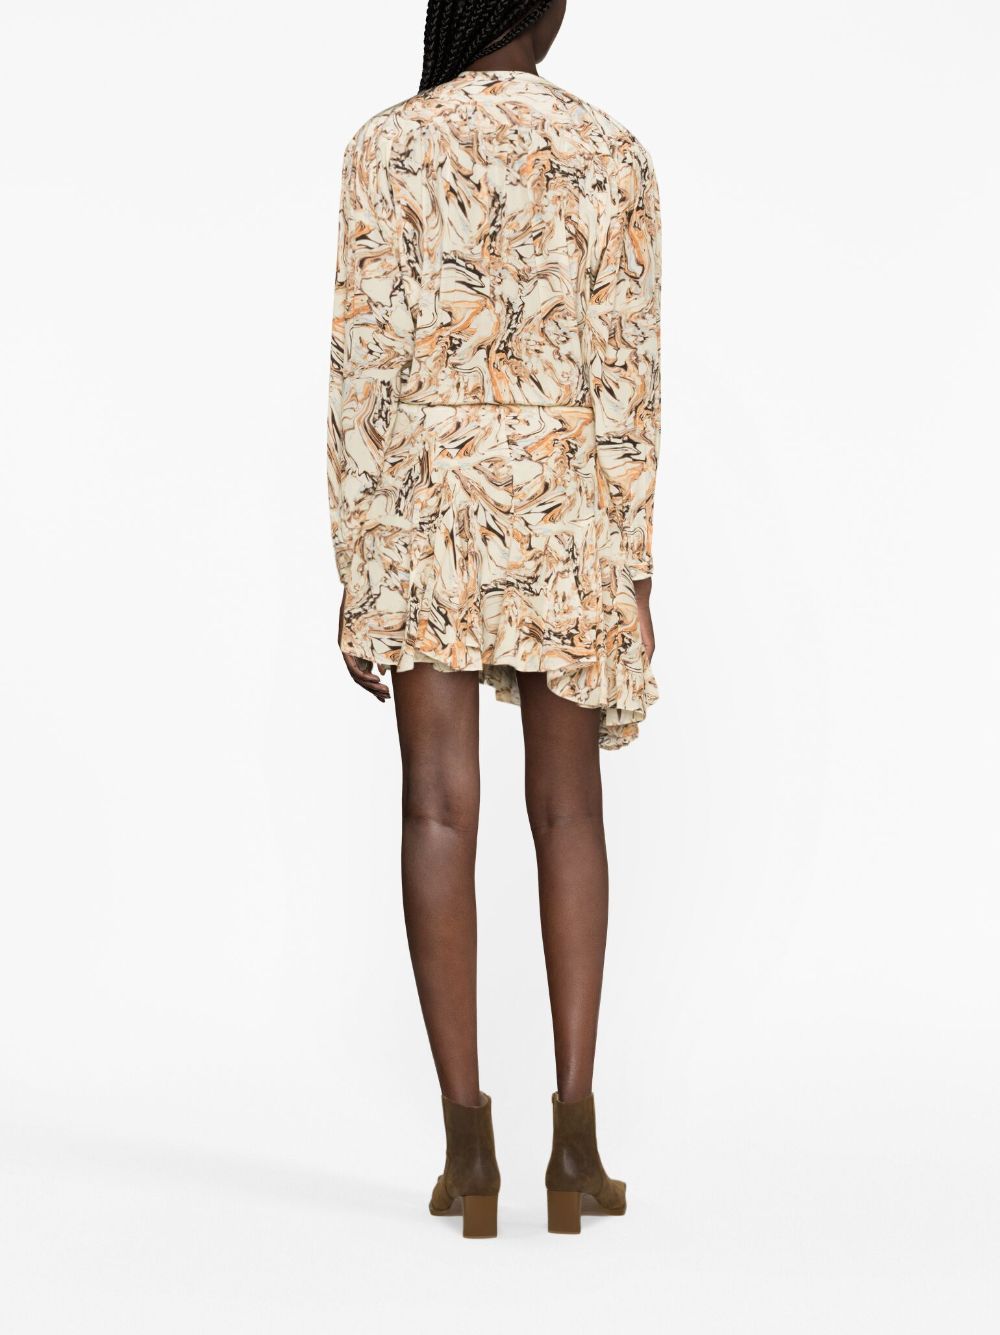 ISABEL MARANT Abstract-Print Silk Minidress for Women in Tan - FW23 Collection